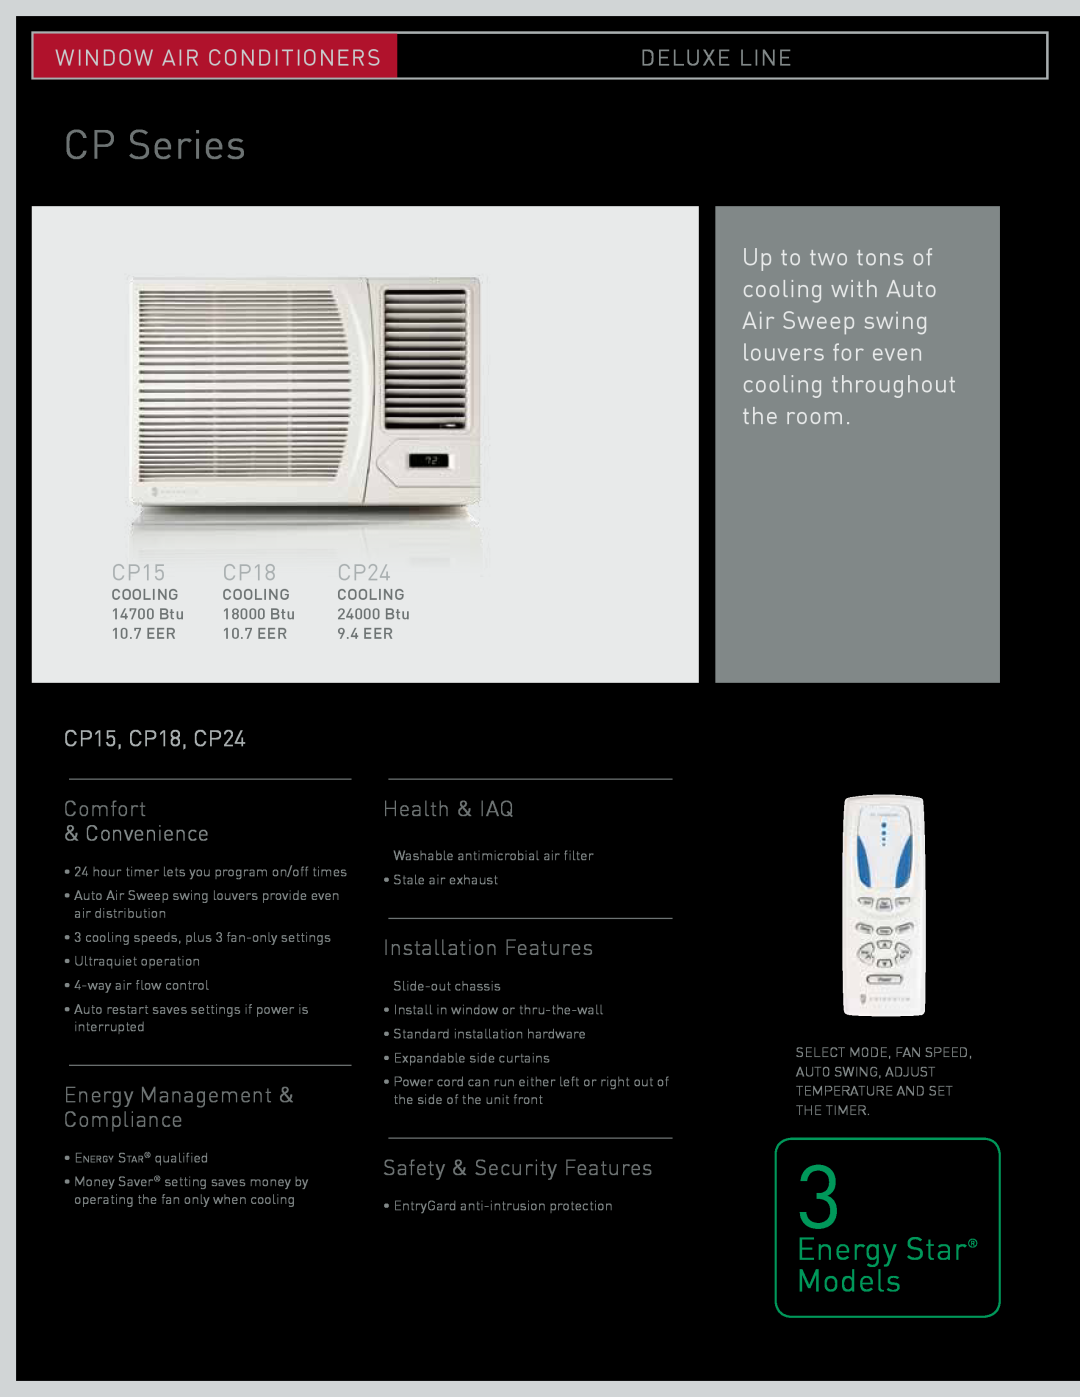 Friedrich CP Series, Energy Star Models, Window Air Conditioners, Deluxe Line, CP15, CP18, CP24, Convenience 